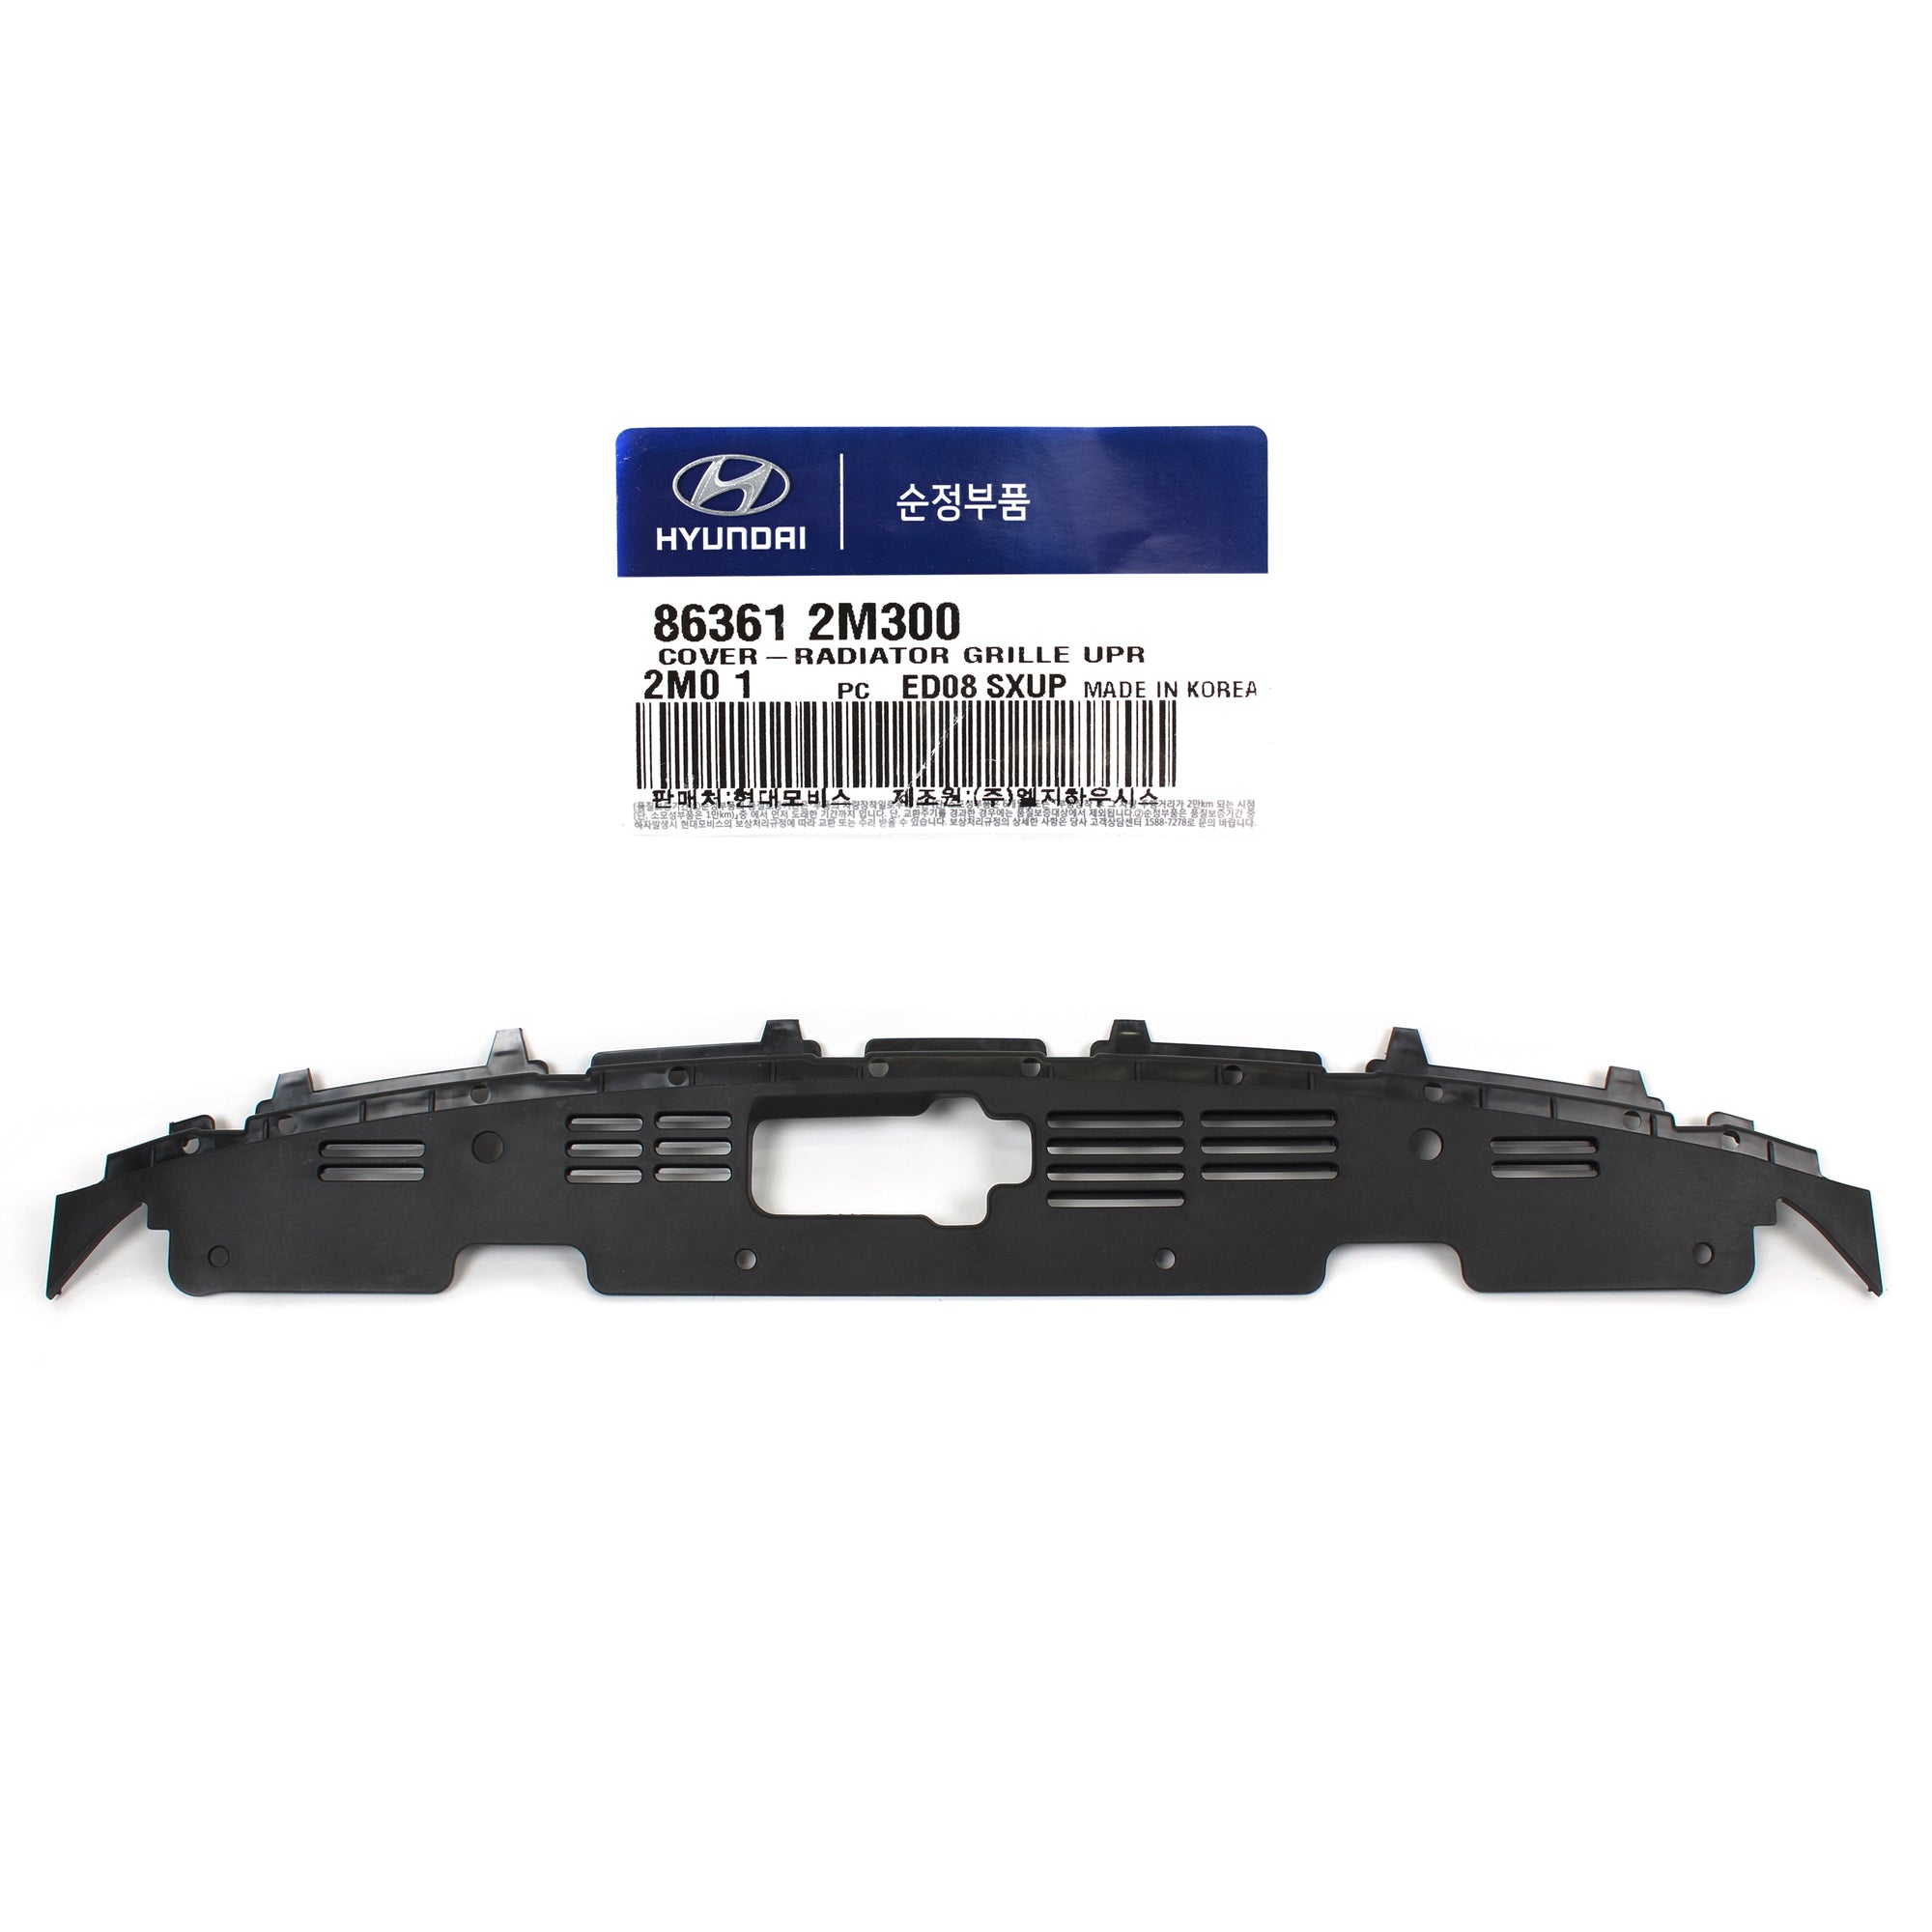 Radiator Grille Upper Cover GENUINE for 13-16 Hyundai Genesis Coupe 863612M300